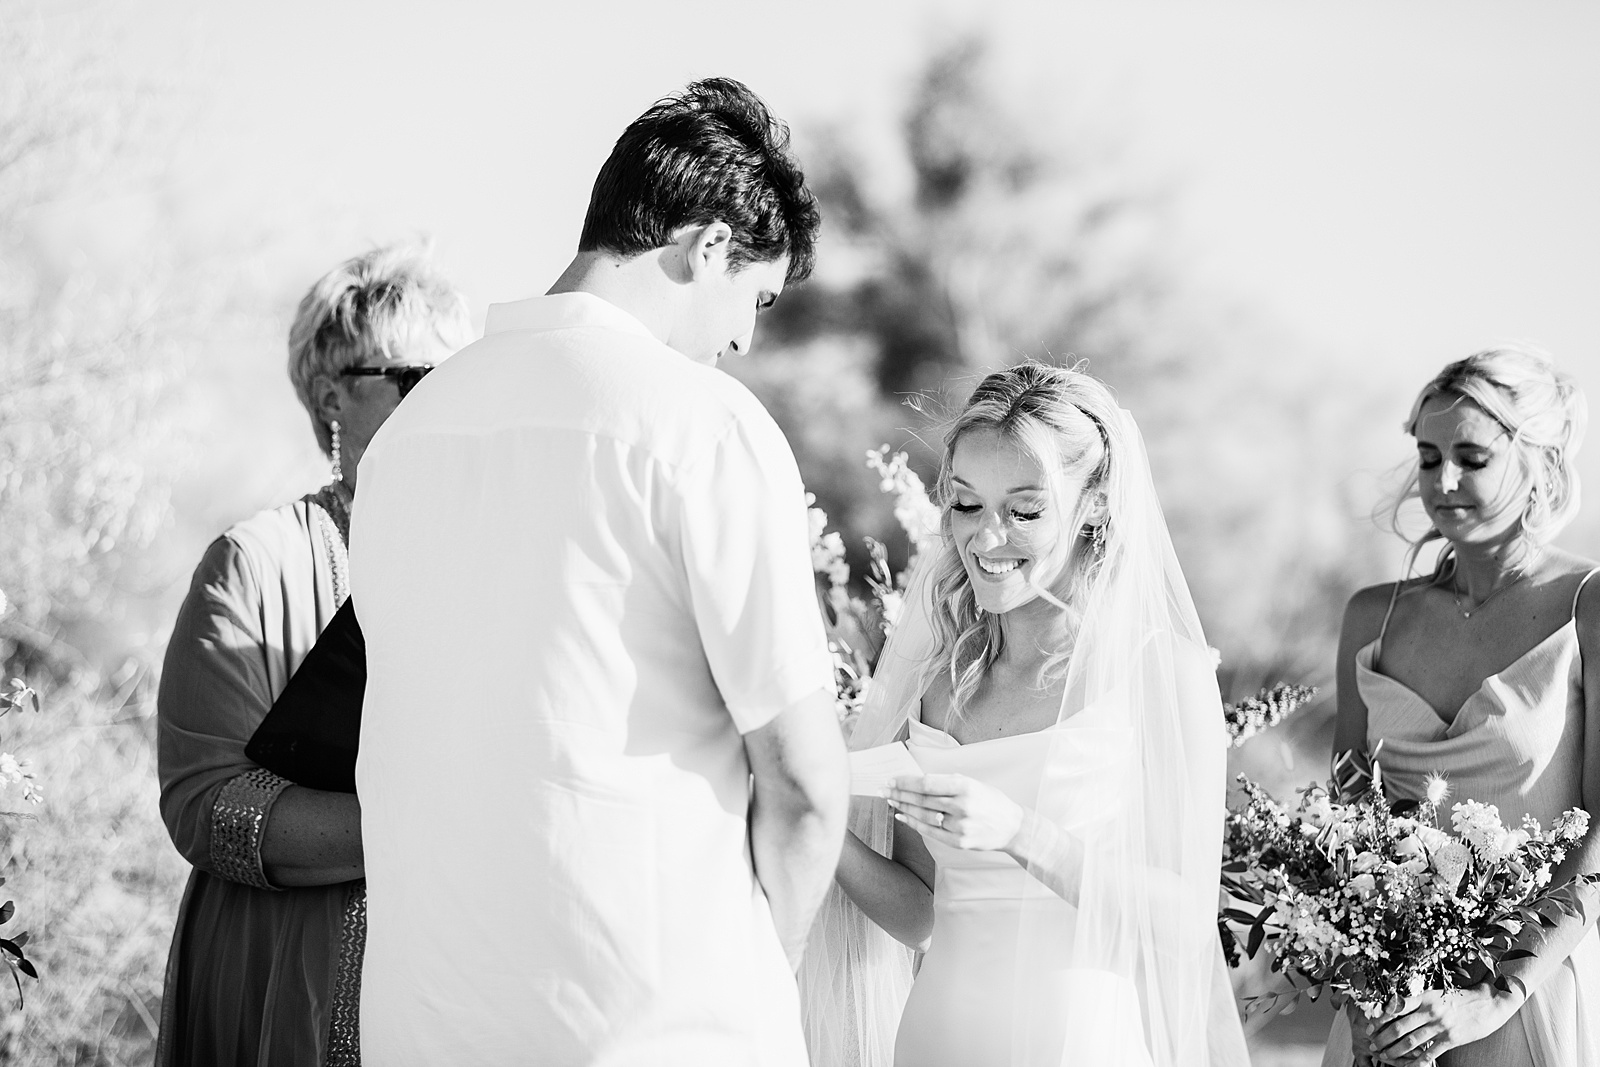 Bride and Groom exchange vows during their Superstition Mountain Micro wedding ceremony by Lost Dutchman wedding photographer PMA Photography.